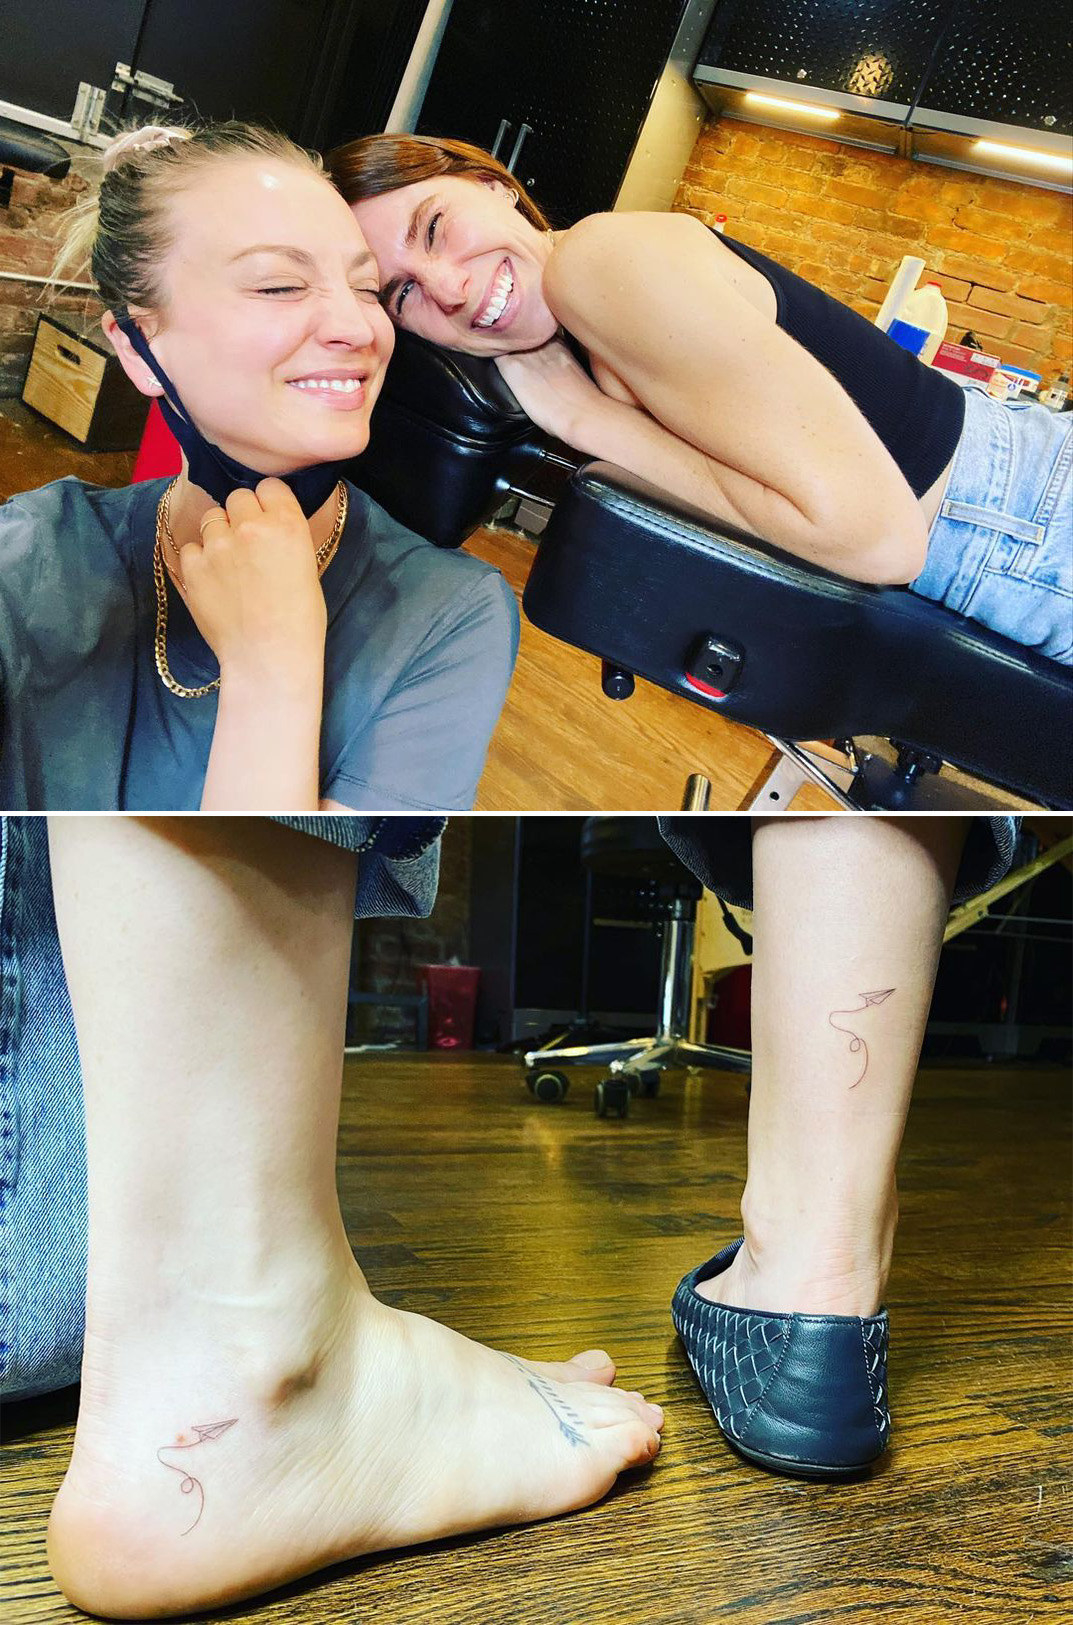 Kaley and Zosia smiling while Zodia gets a tattoo, and then close-ups of the paper airplane tattoos on their ankles